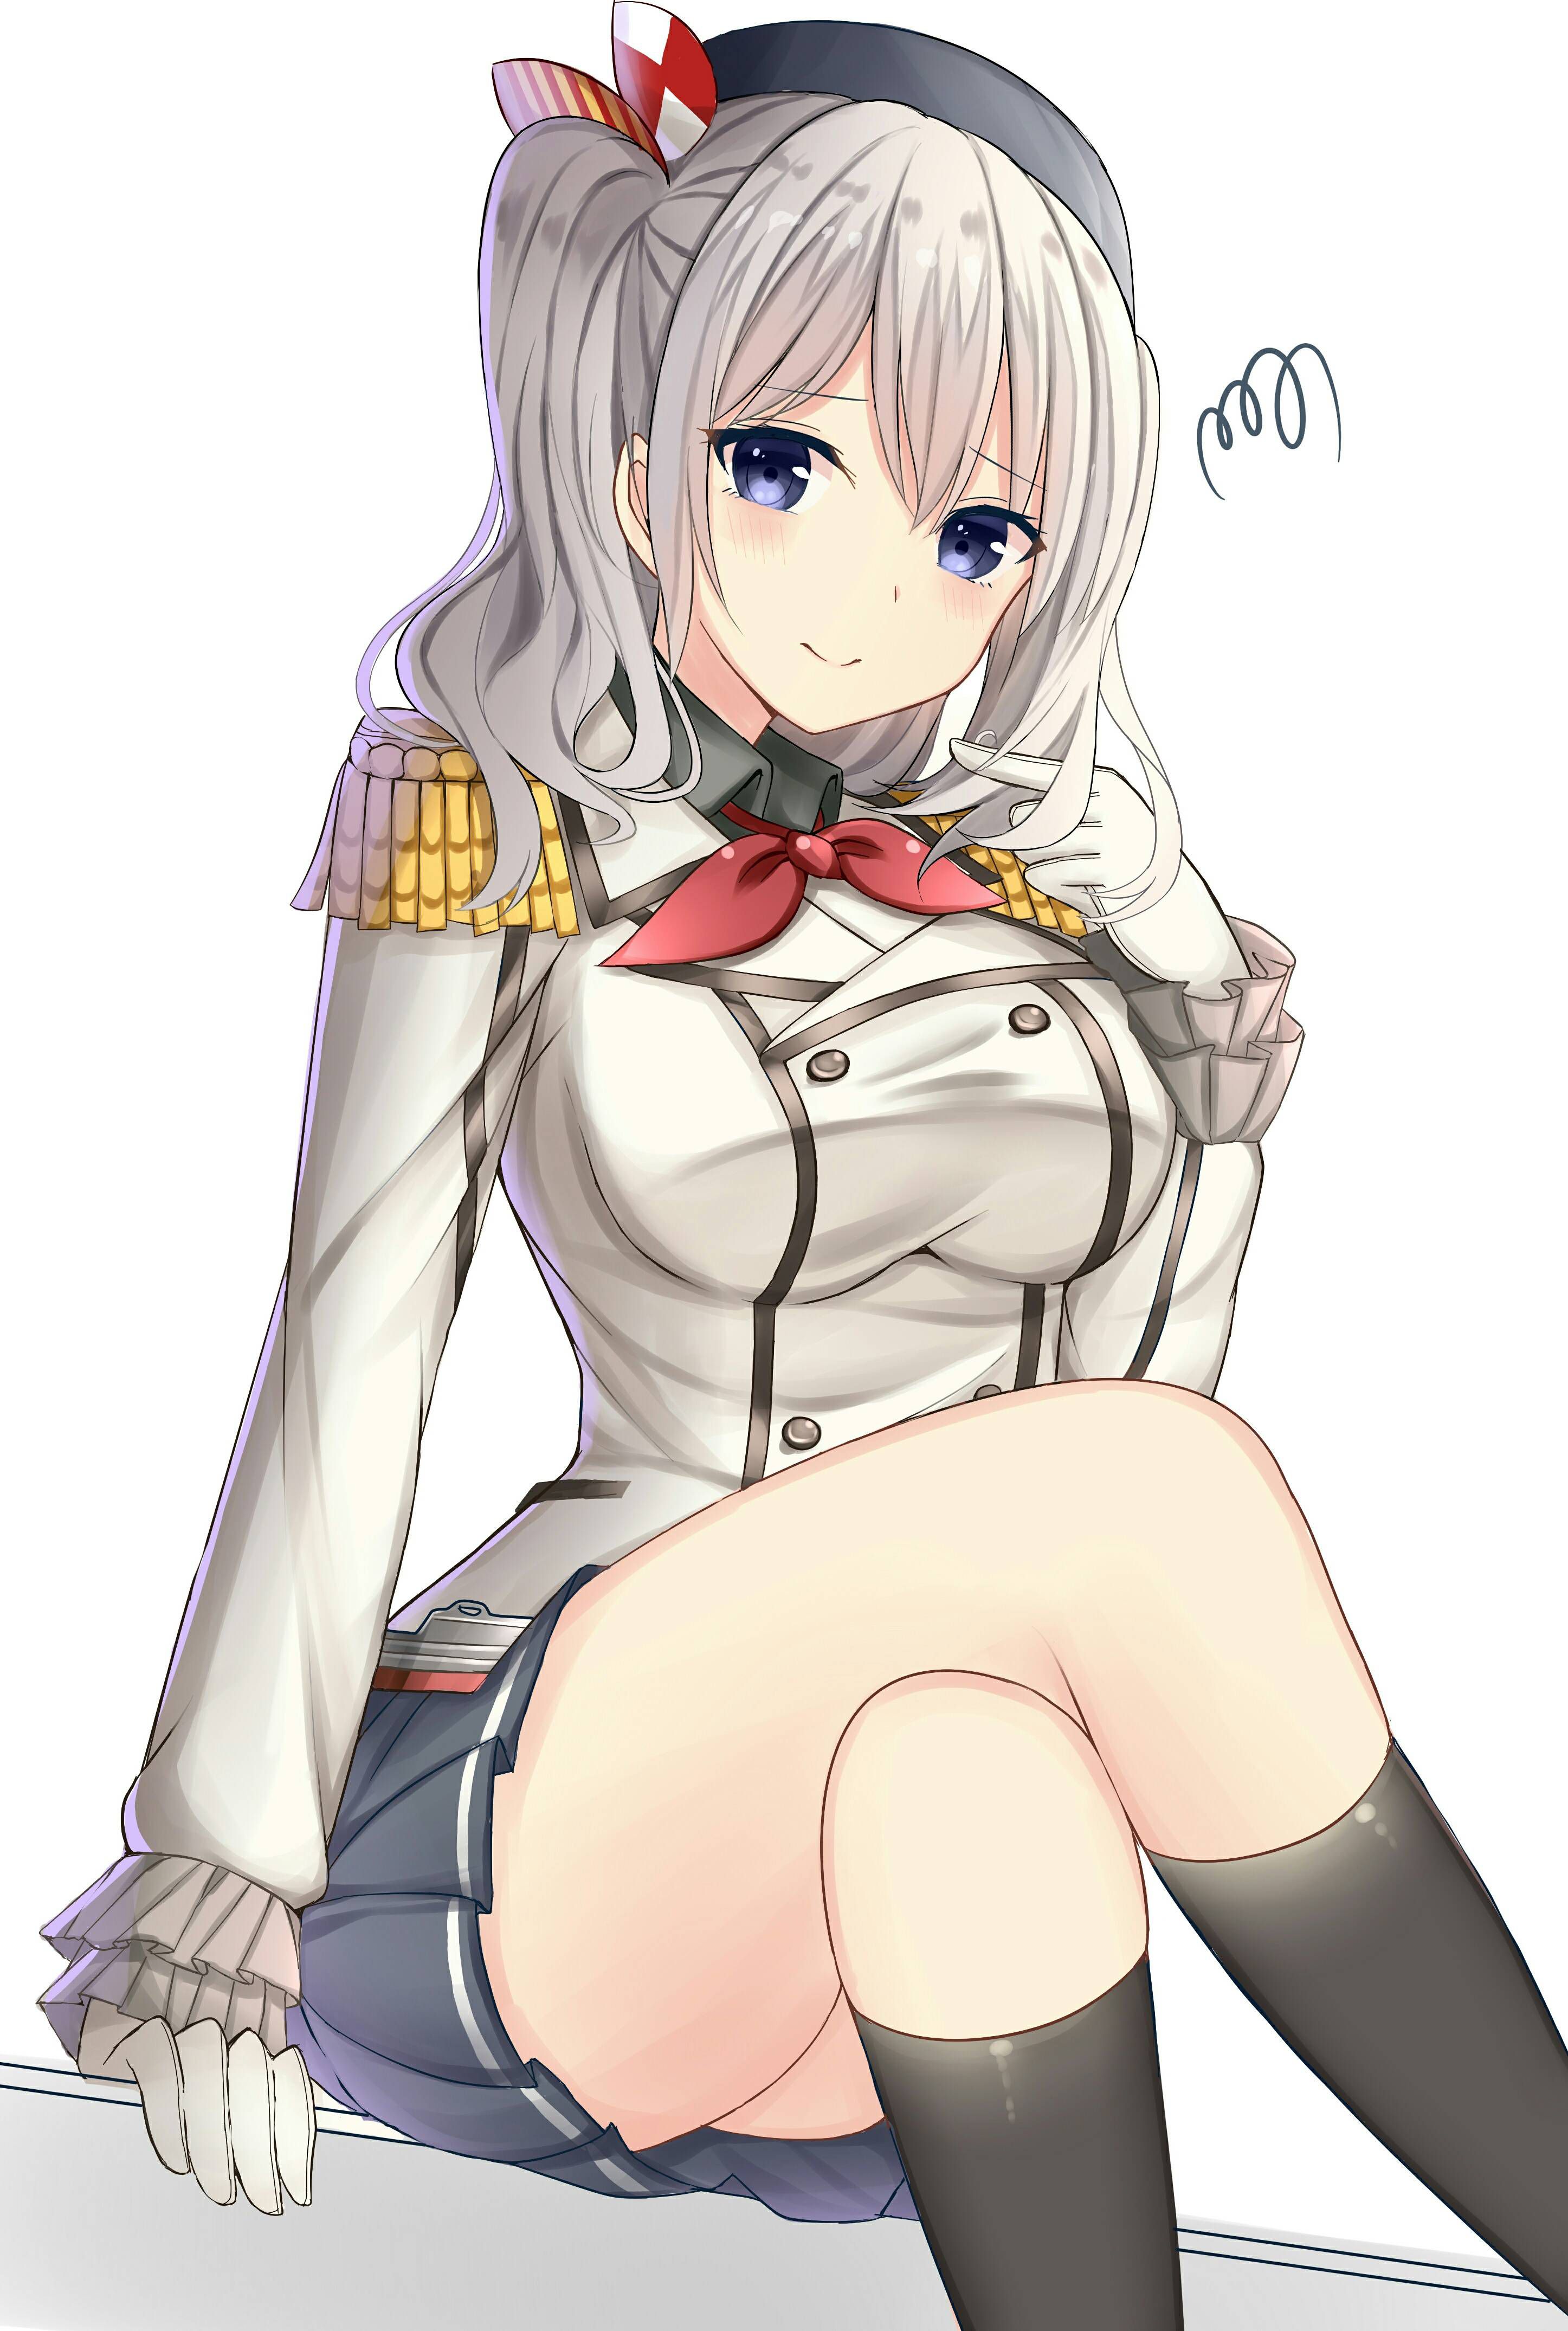 [Erotic] Ship of this new ship daughter of Kashima Image surge www wwwwww part1 3